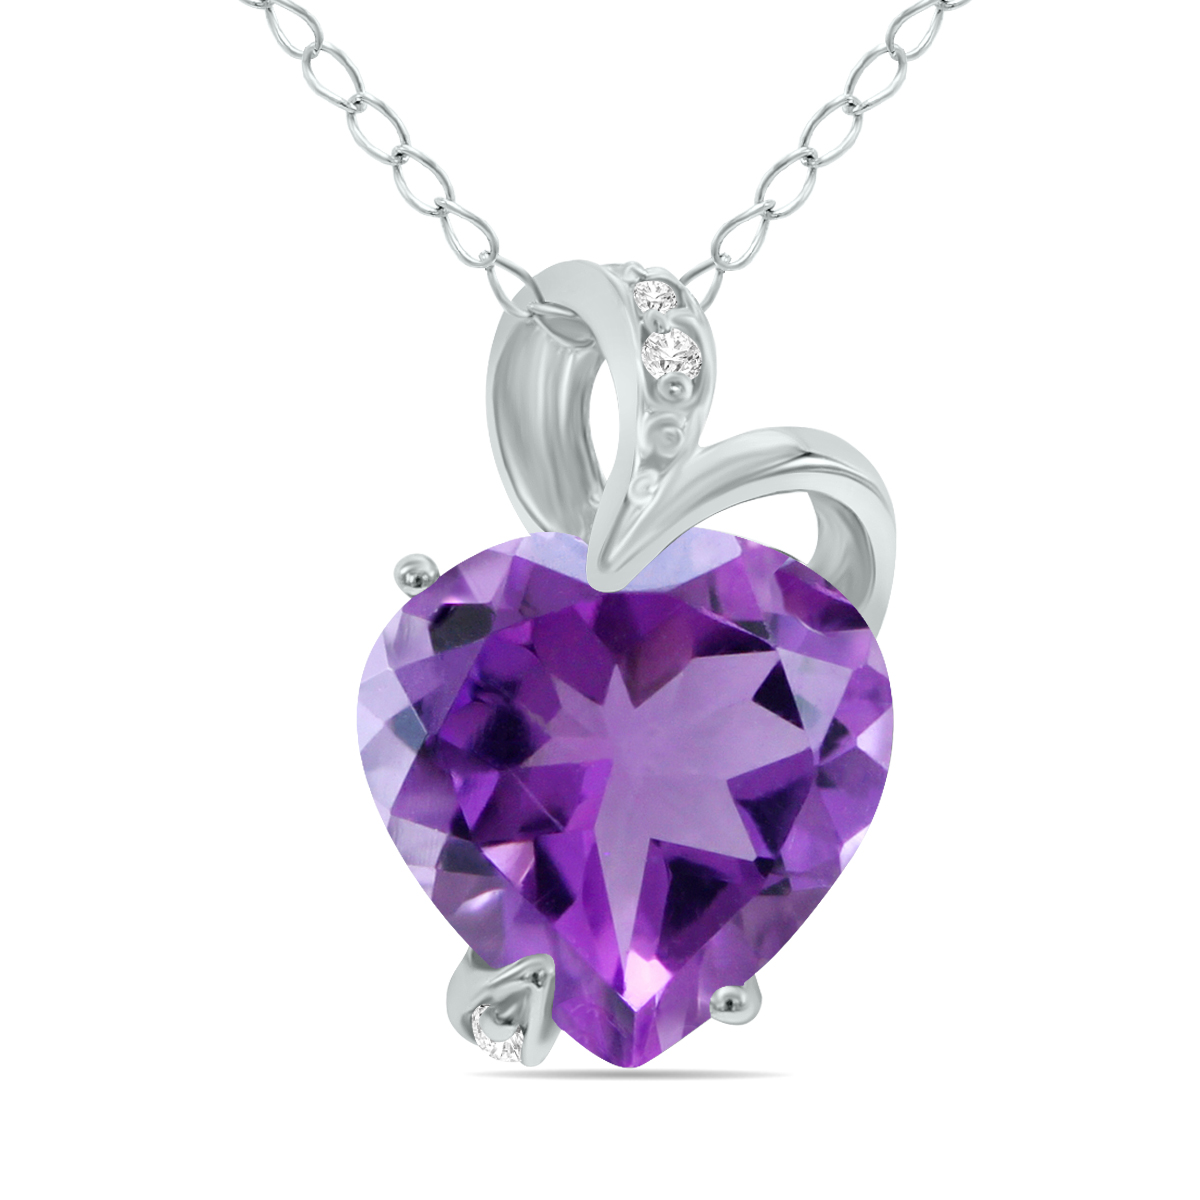 Image of 350 Carat Amethyst Heart and Diamond Pendant in 14K White Gold